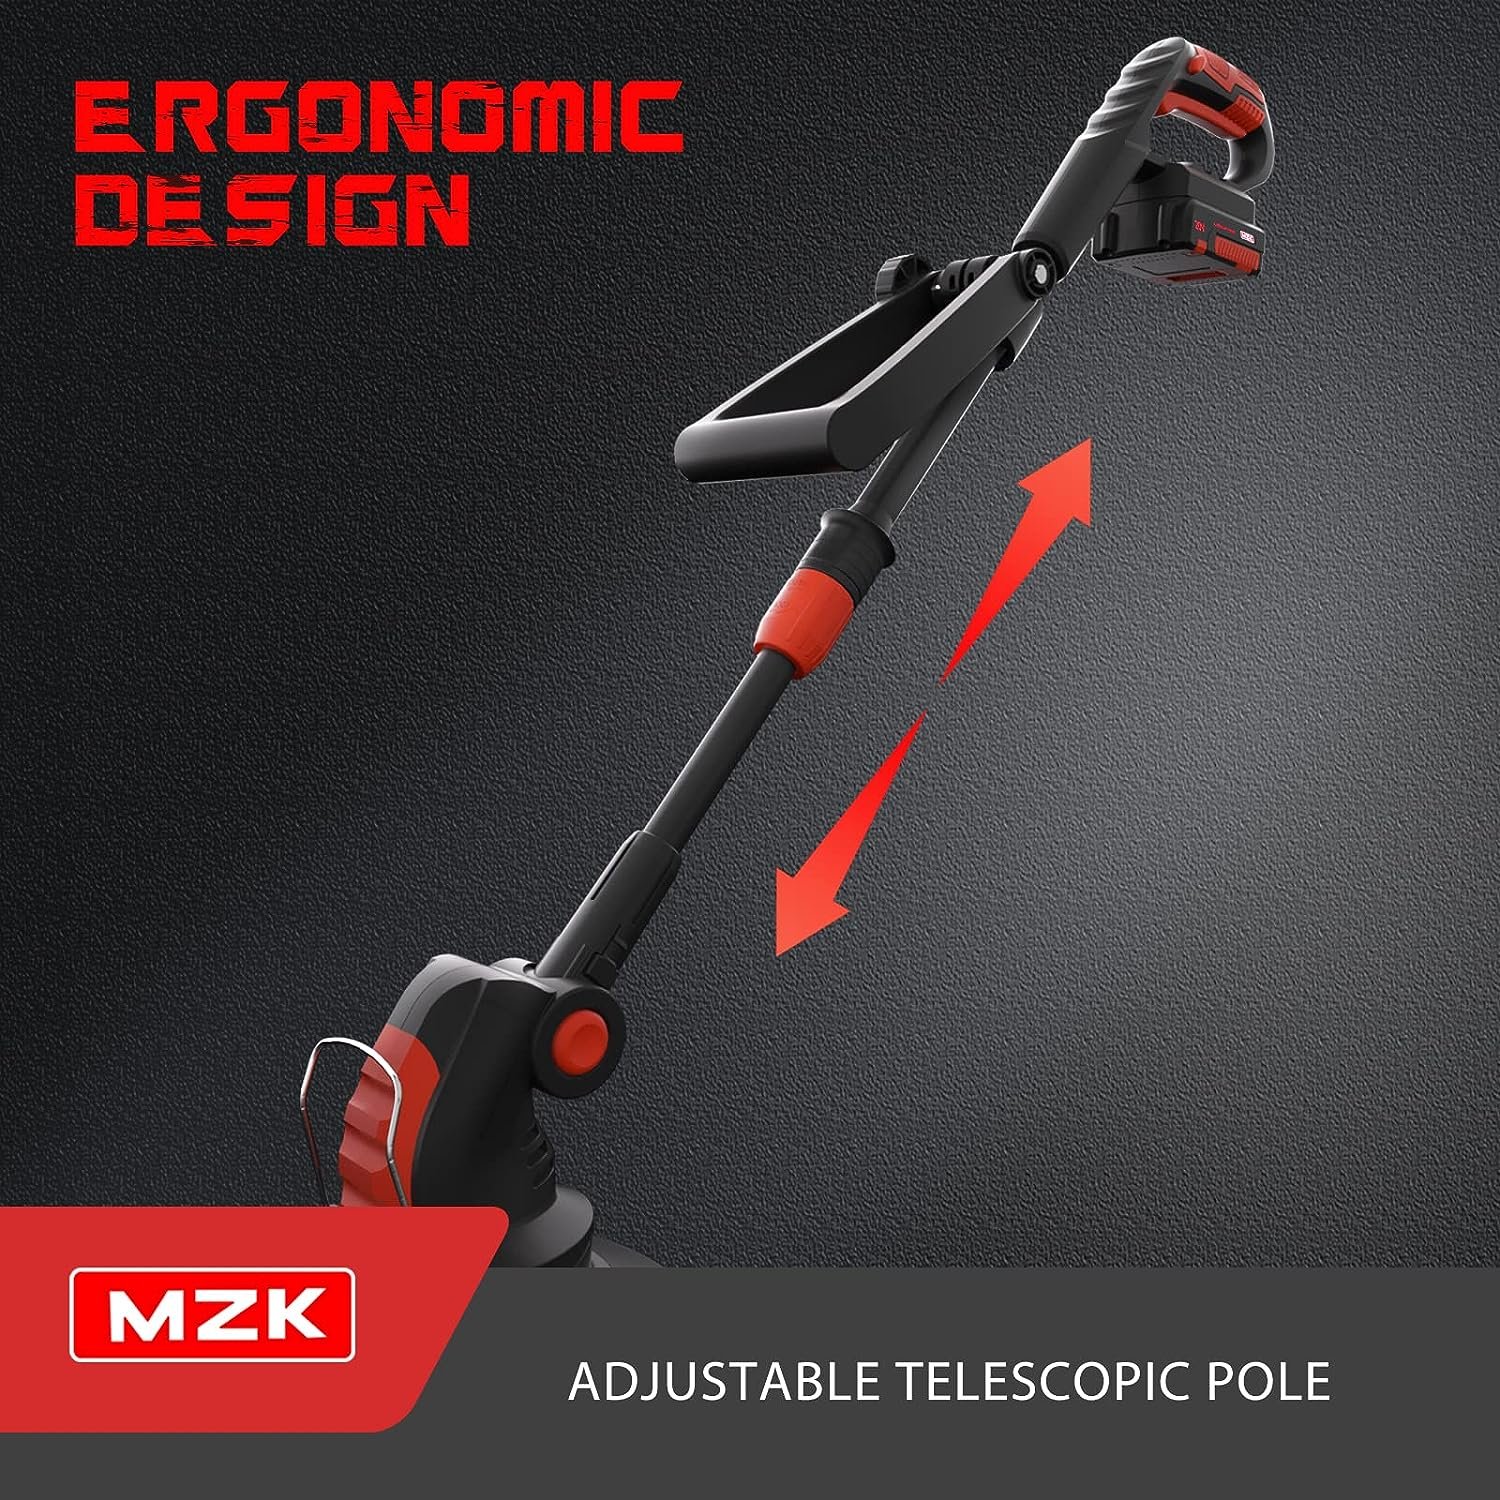 MZK String Trimmer Review